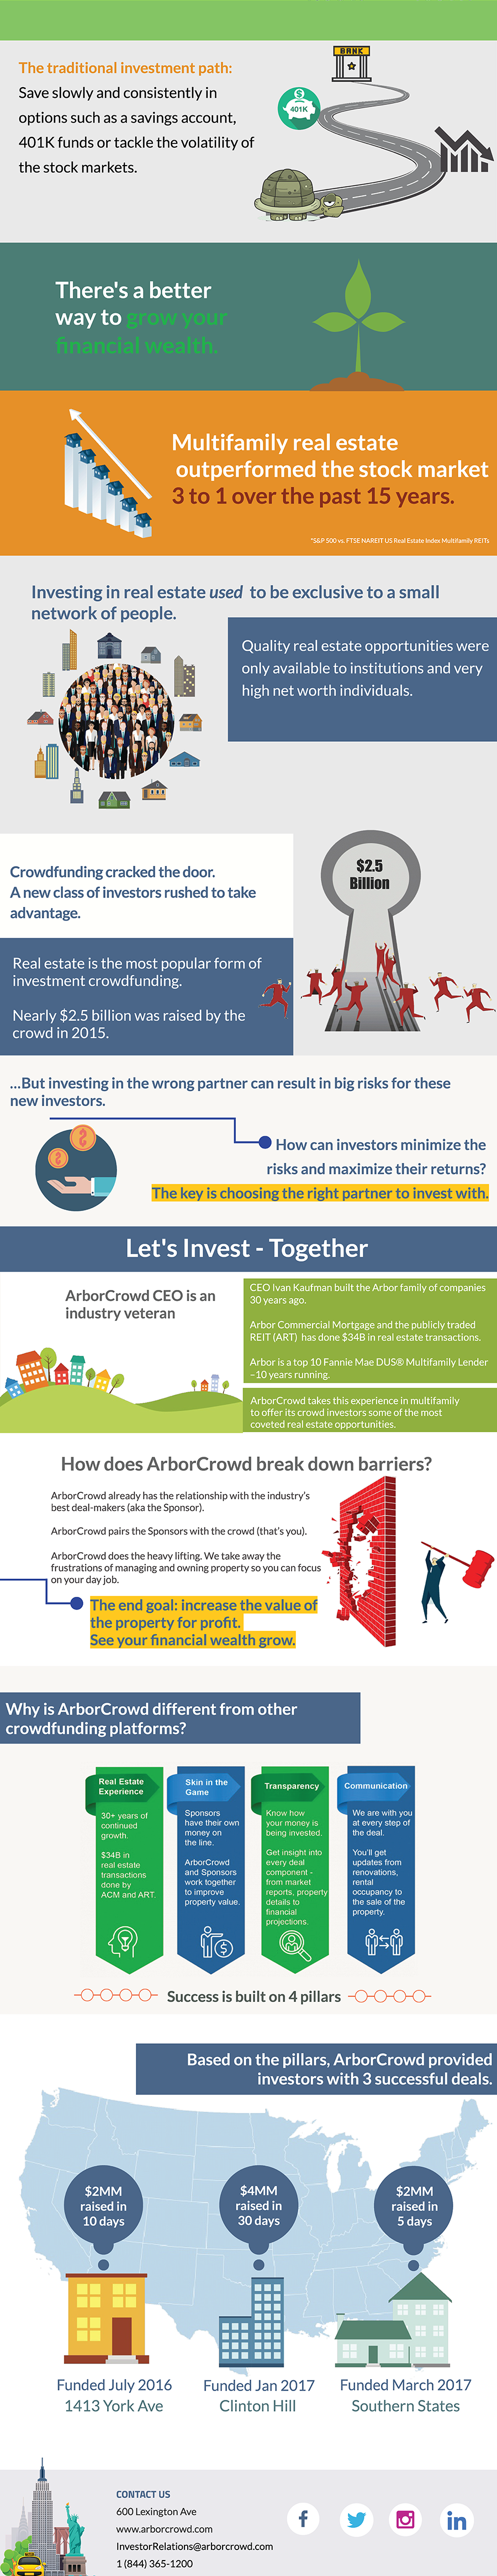 ArborCrowd Real Estate Investment Infographic